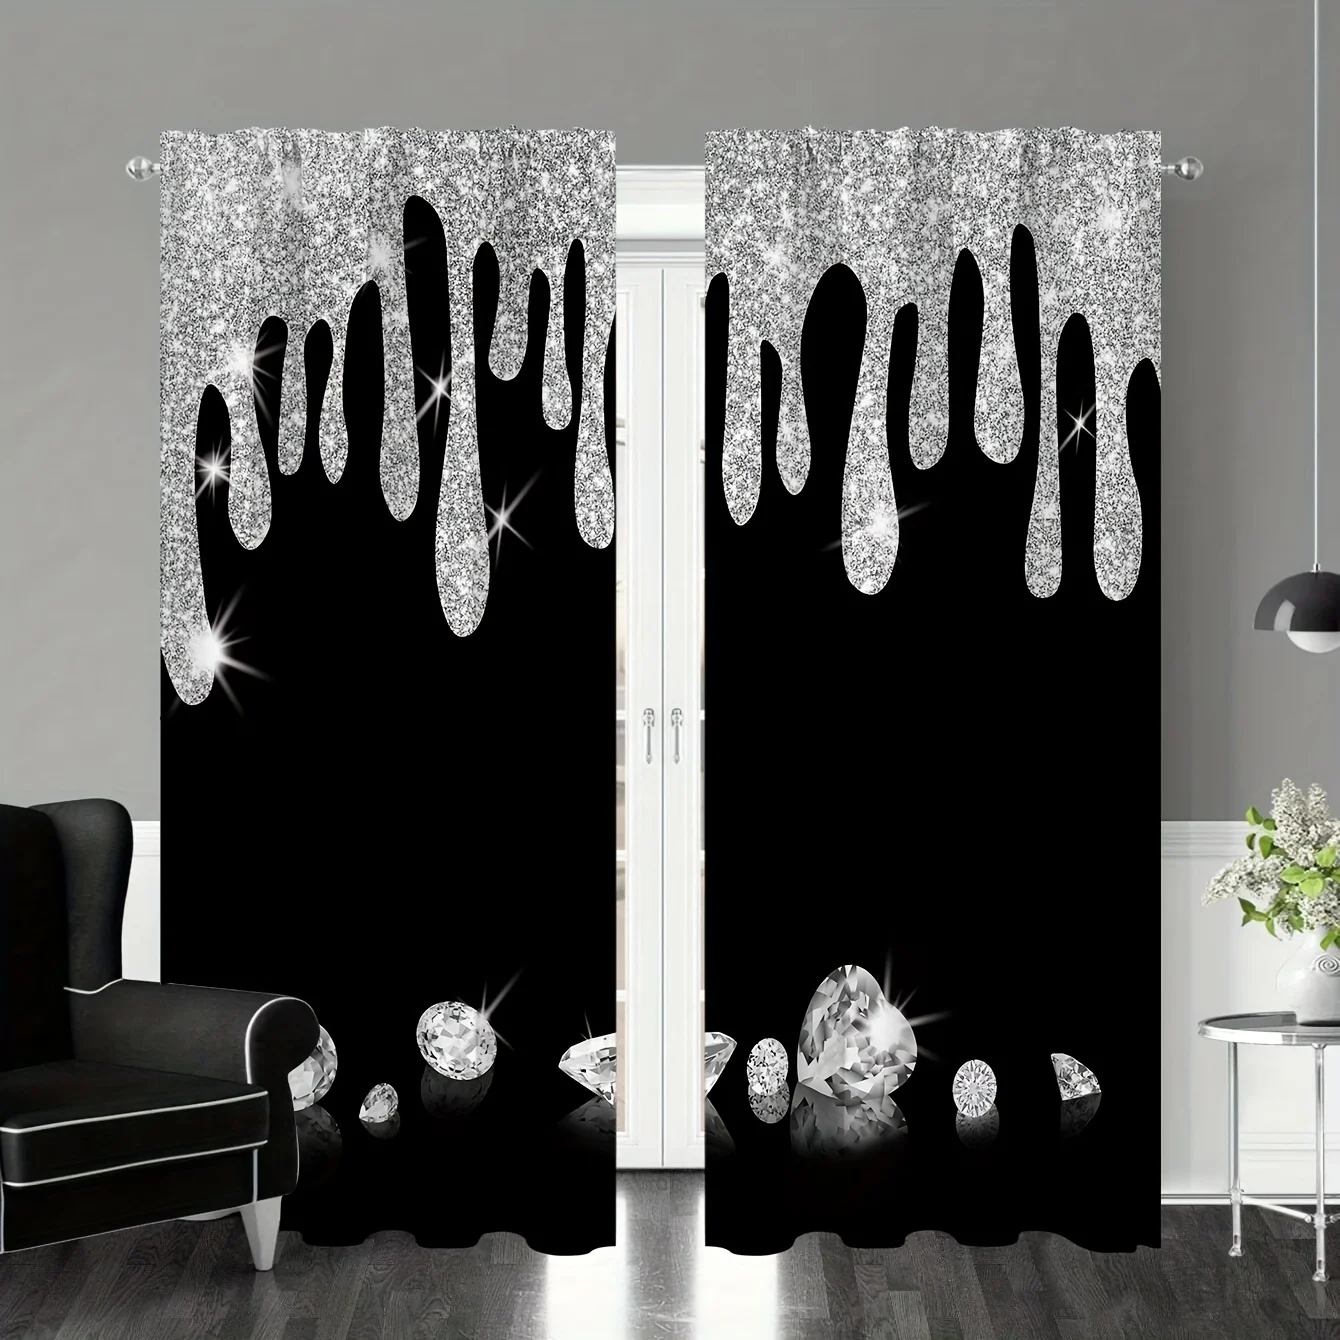 

2pcs Shiny Silvery Water Drops Print Rod Pocket Curtains, Semi Blackout Decorative Curtains For Living Room Bedroom Office Home